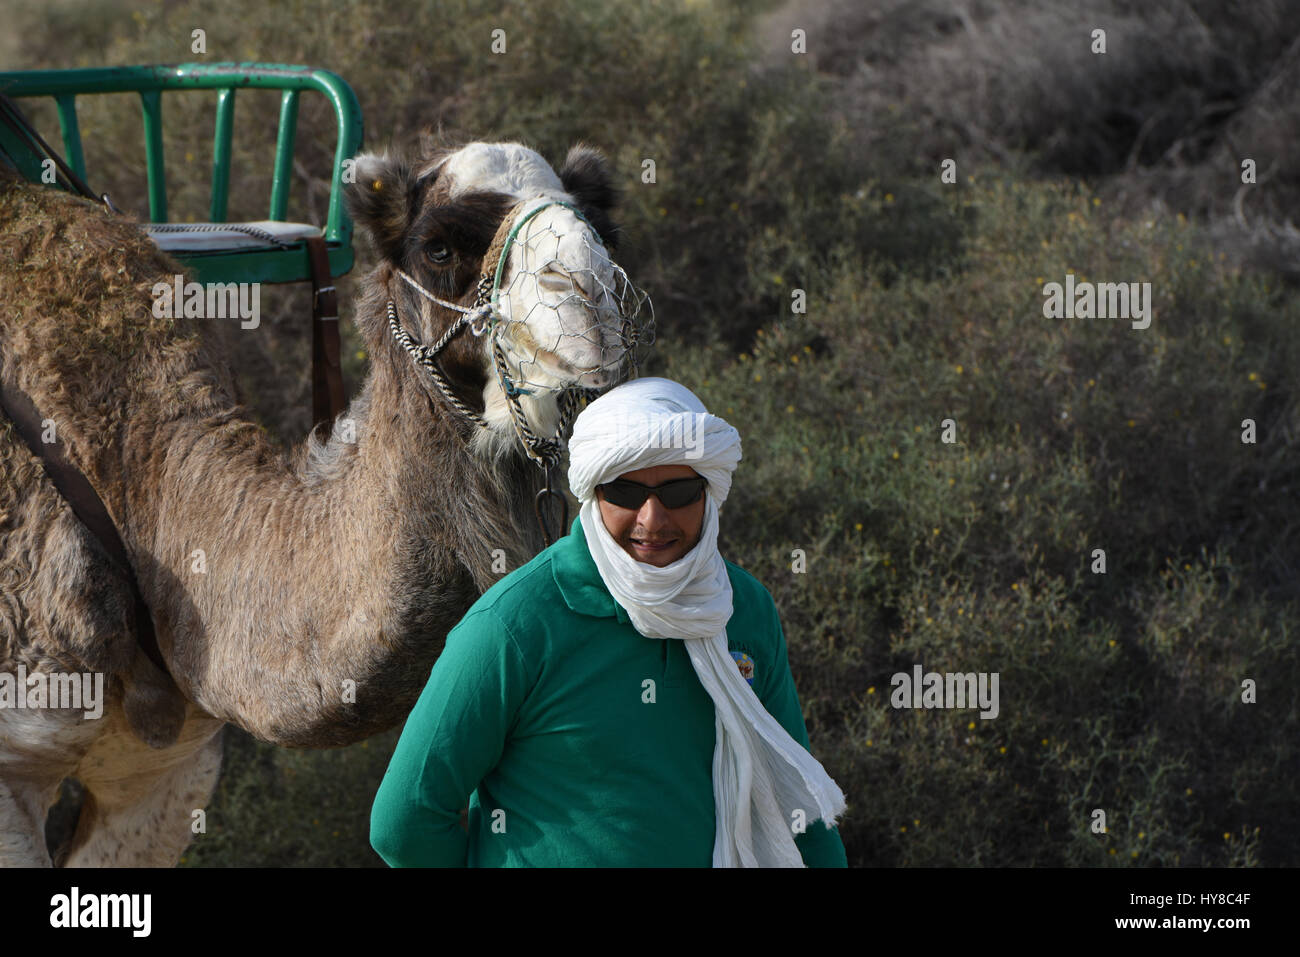 Camel leading tour guide Stock Photo